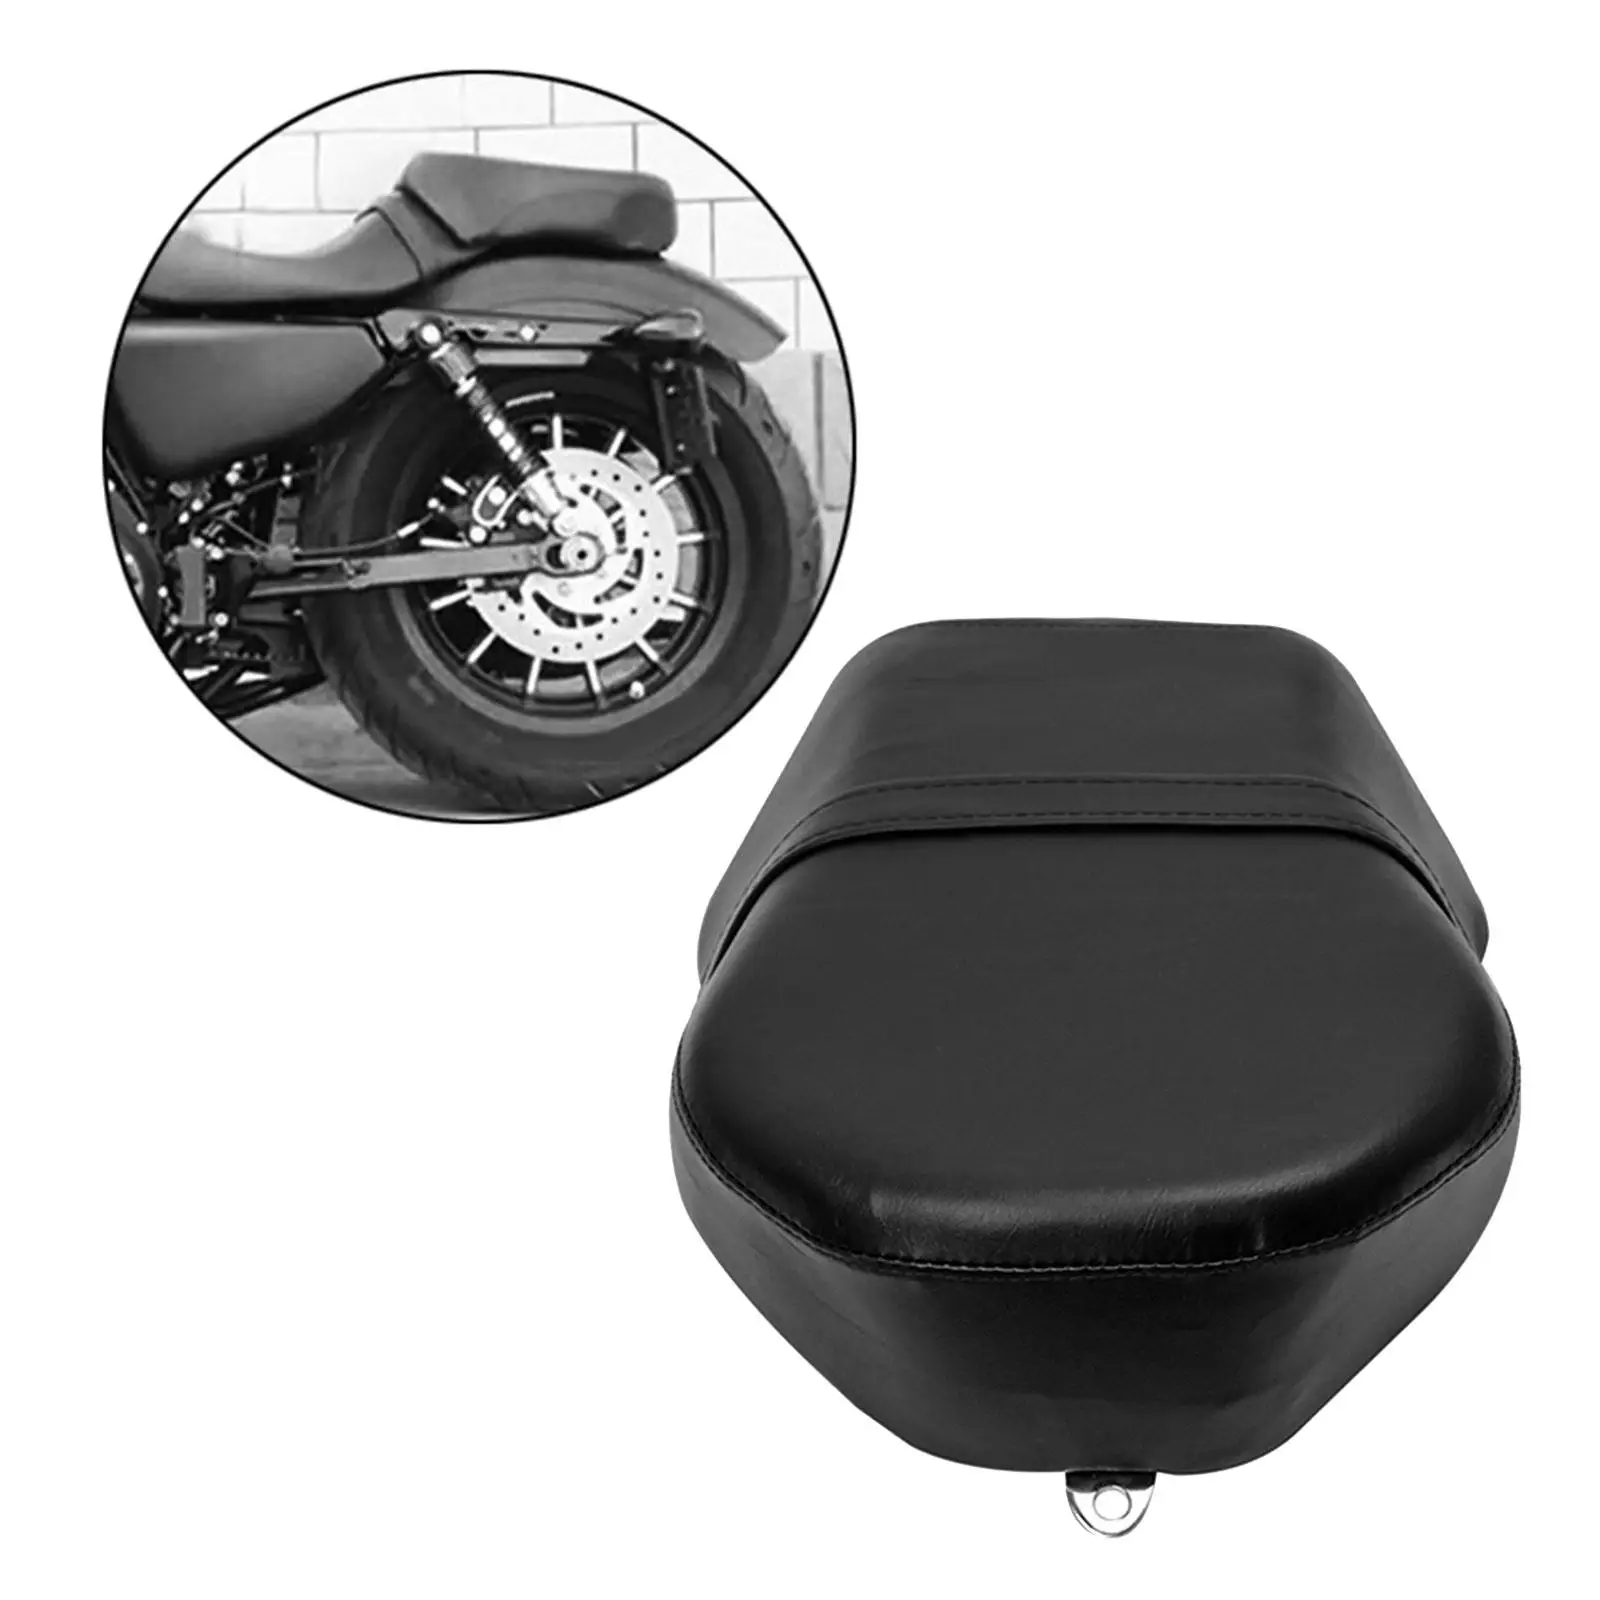 Motorcycle Pillion Cushion Pad Black for Harley Sportster Replacement